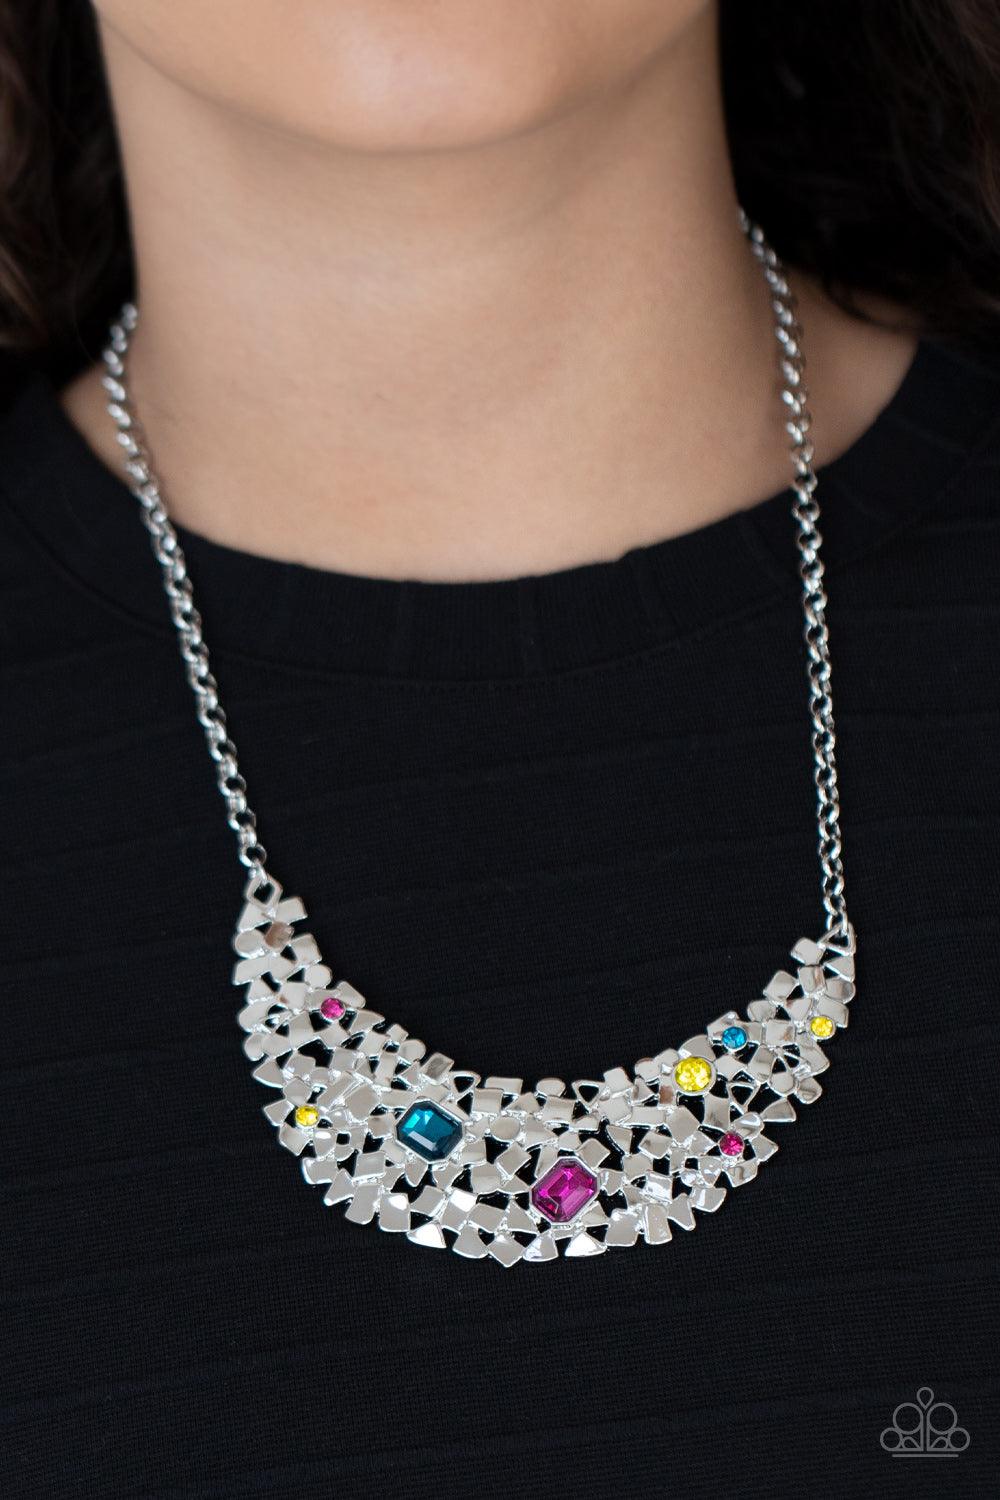 Paparazzi Accessories Fabulously Fragmented - Multi Sporadically dotted in mismatched multicolored rhinestones, a smattering of fragmented silver frames coalesce into a bold half moon below the collar for an edgy fashion. Features an adjustable clasp clos